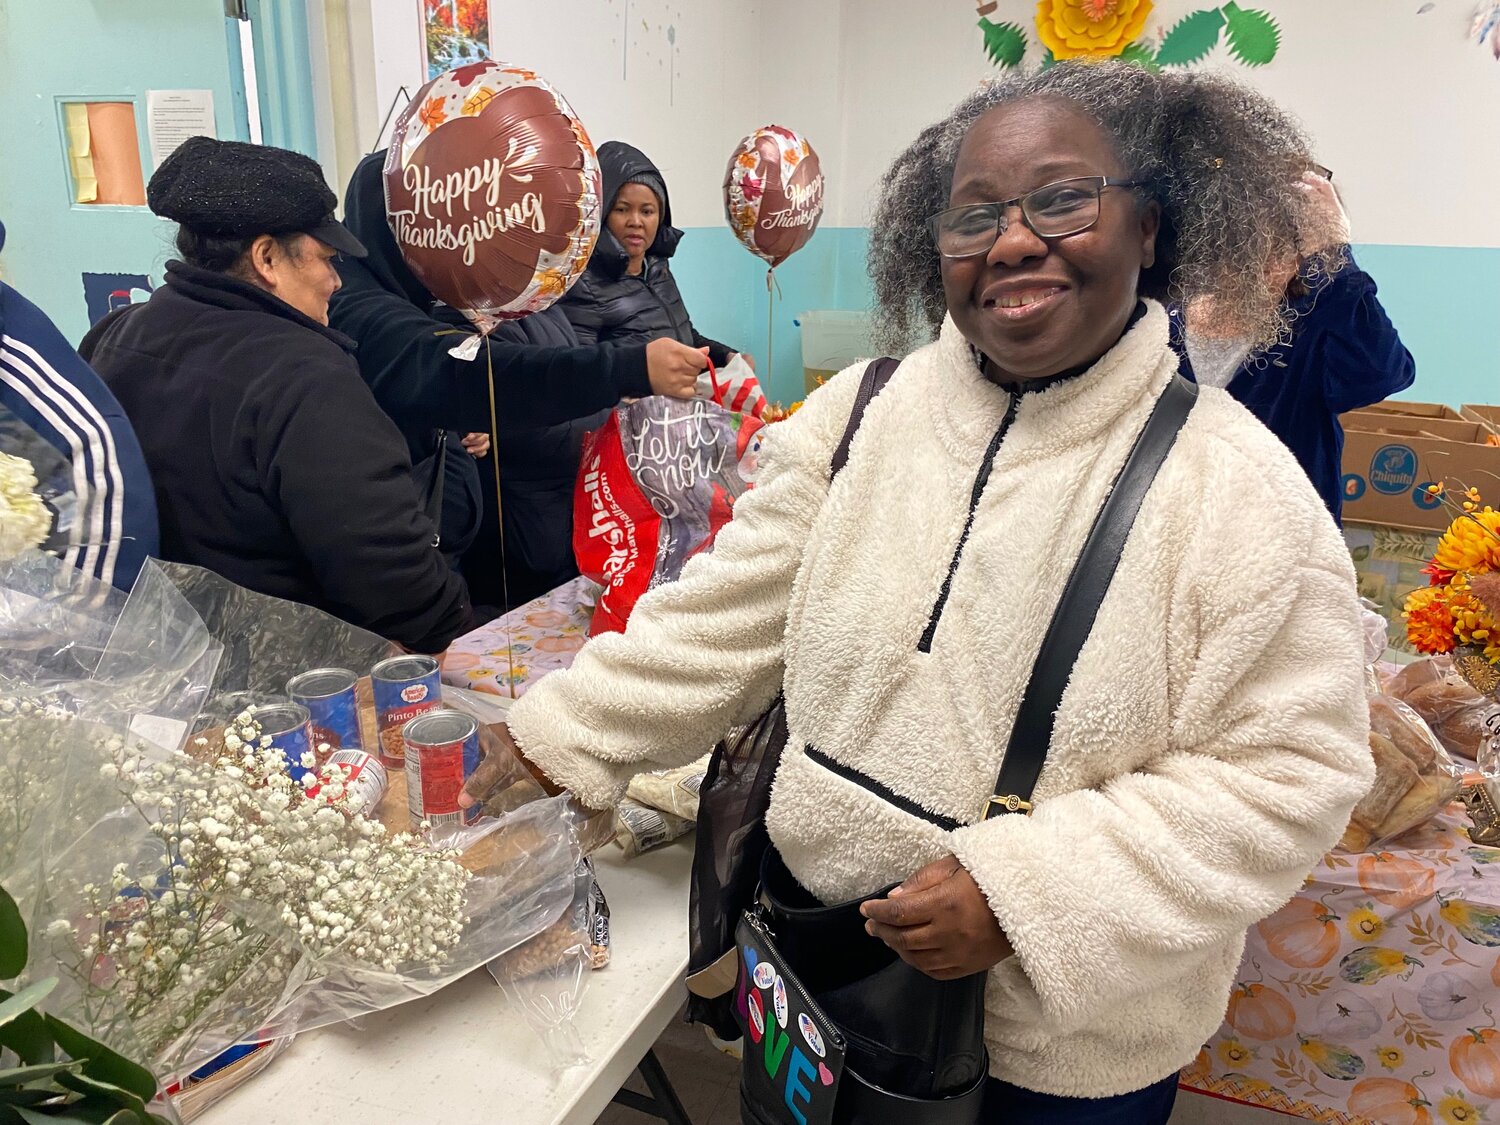 Eloise Thomas frequently volunteers to help with food distribution at Gammy’s Pantry in the Five Towns Community Center.